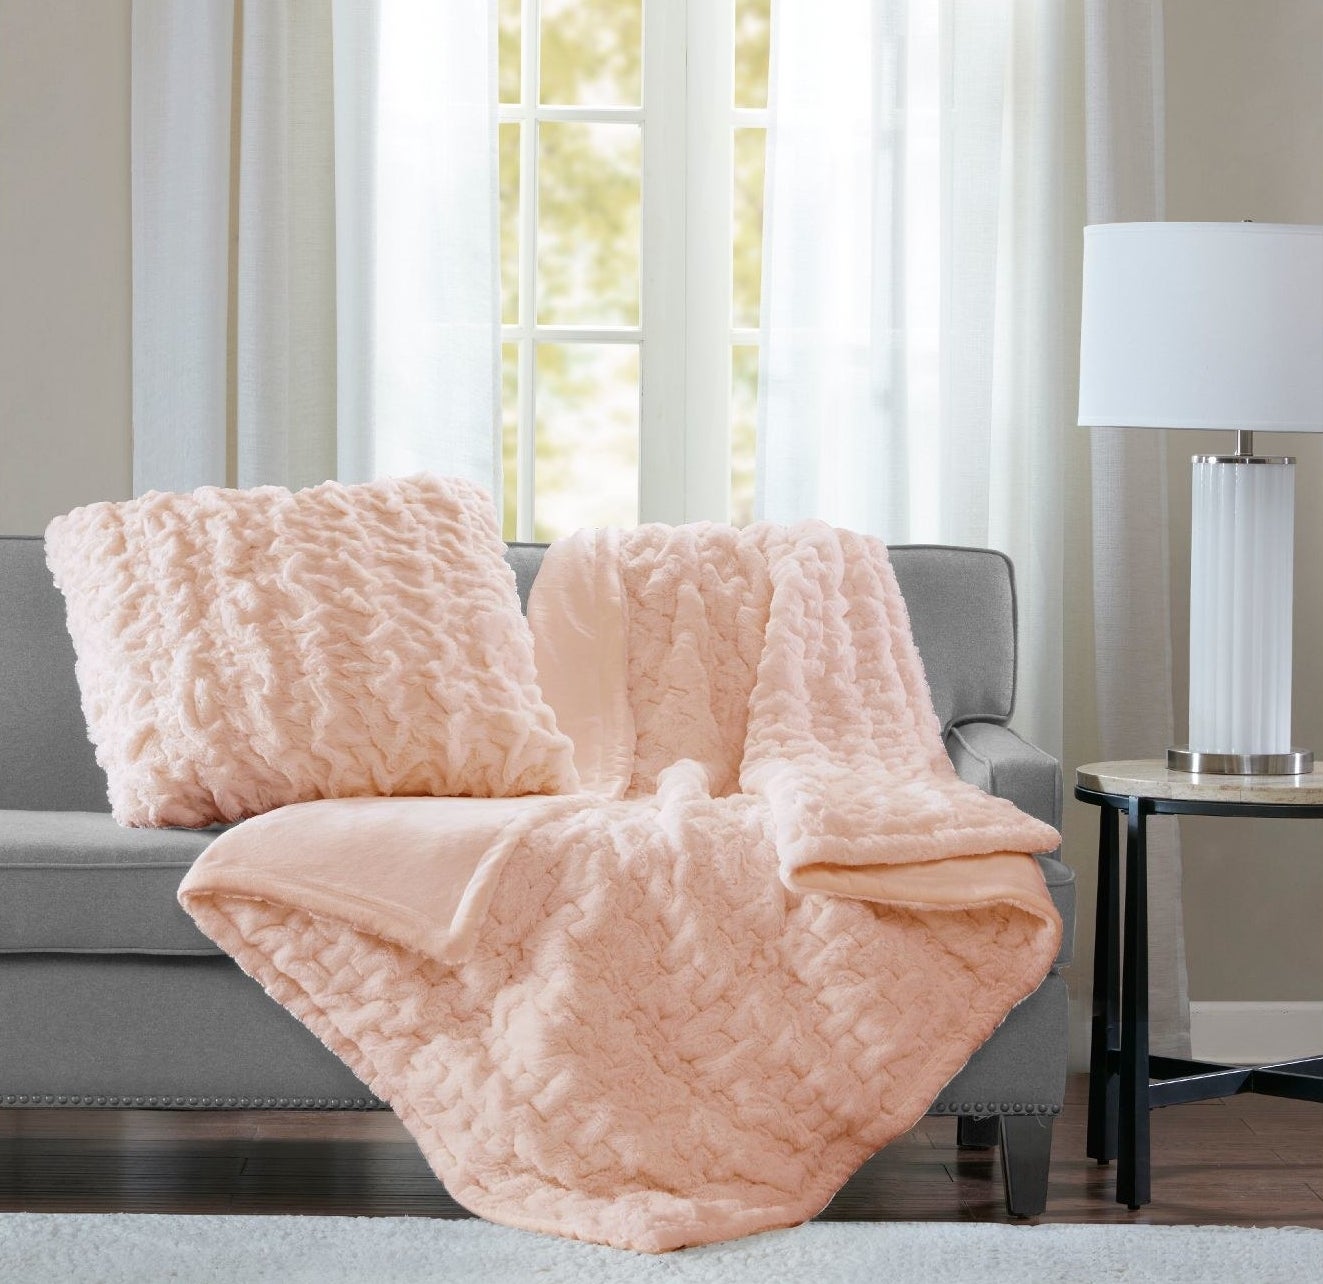 pink faux fur throw blanket draped over a couch